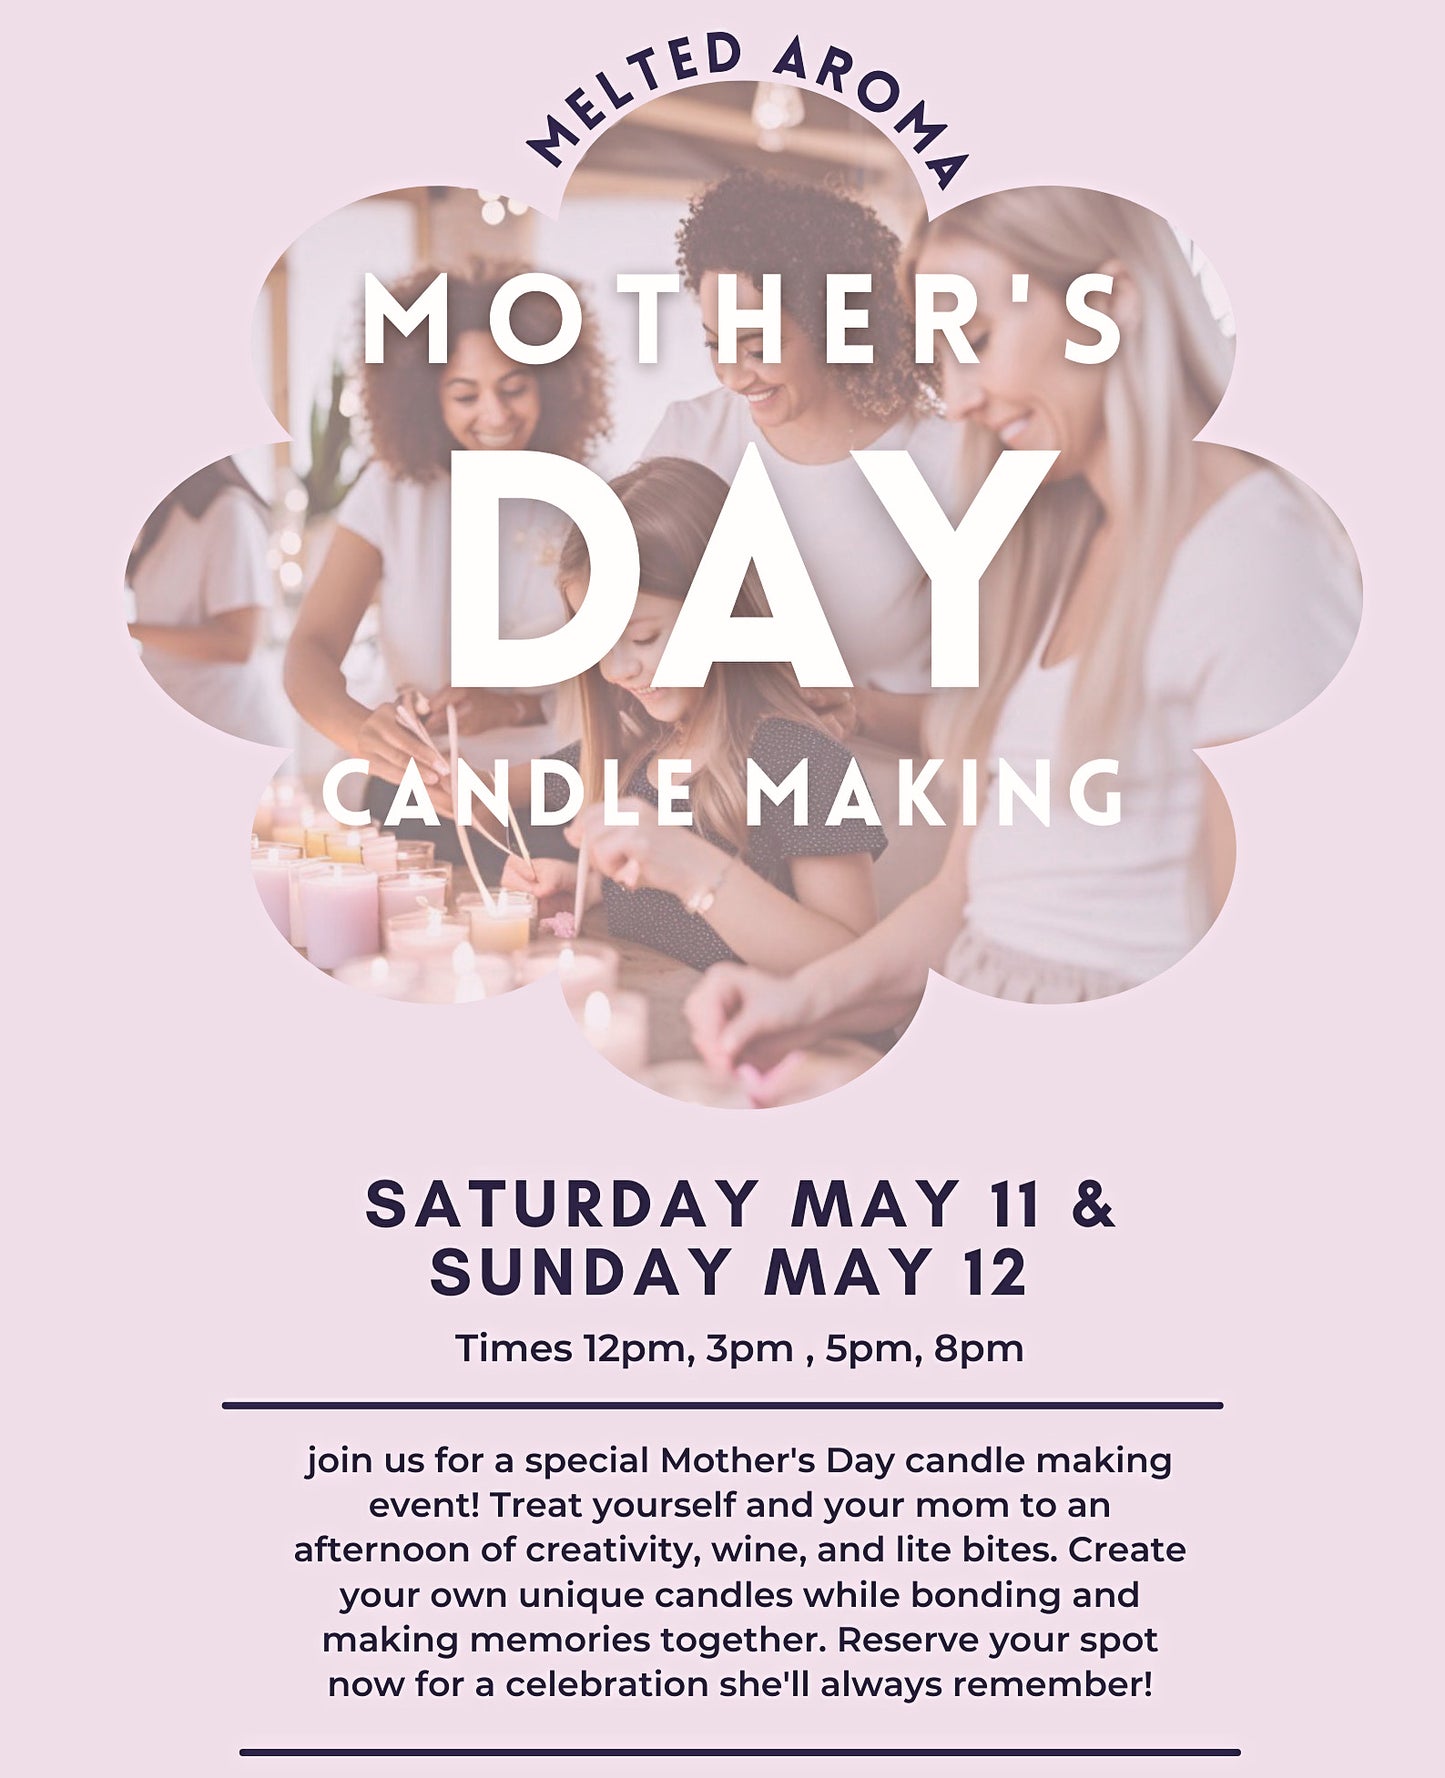 Mothers Day Candle Making (Palm Beach)